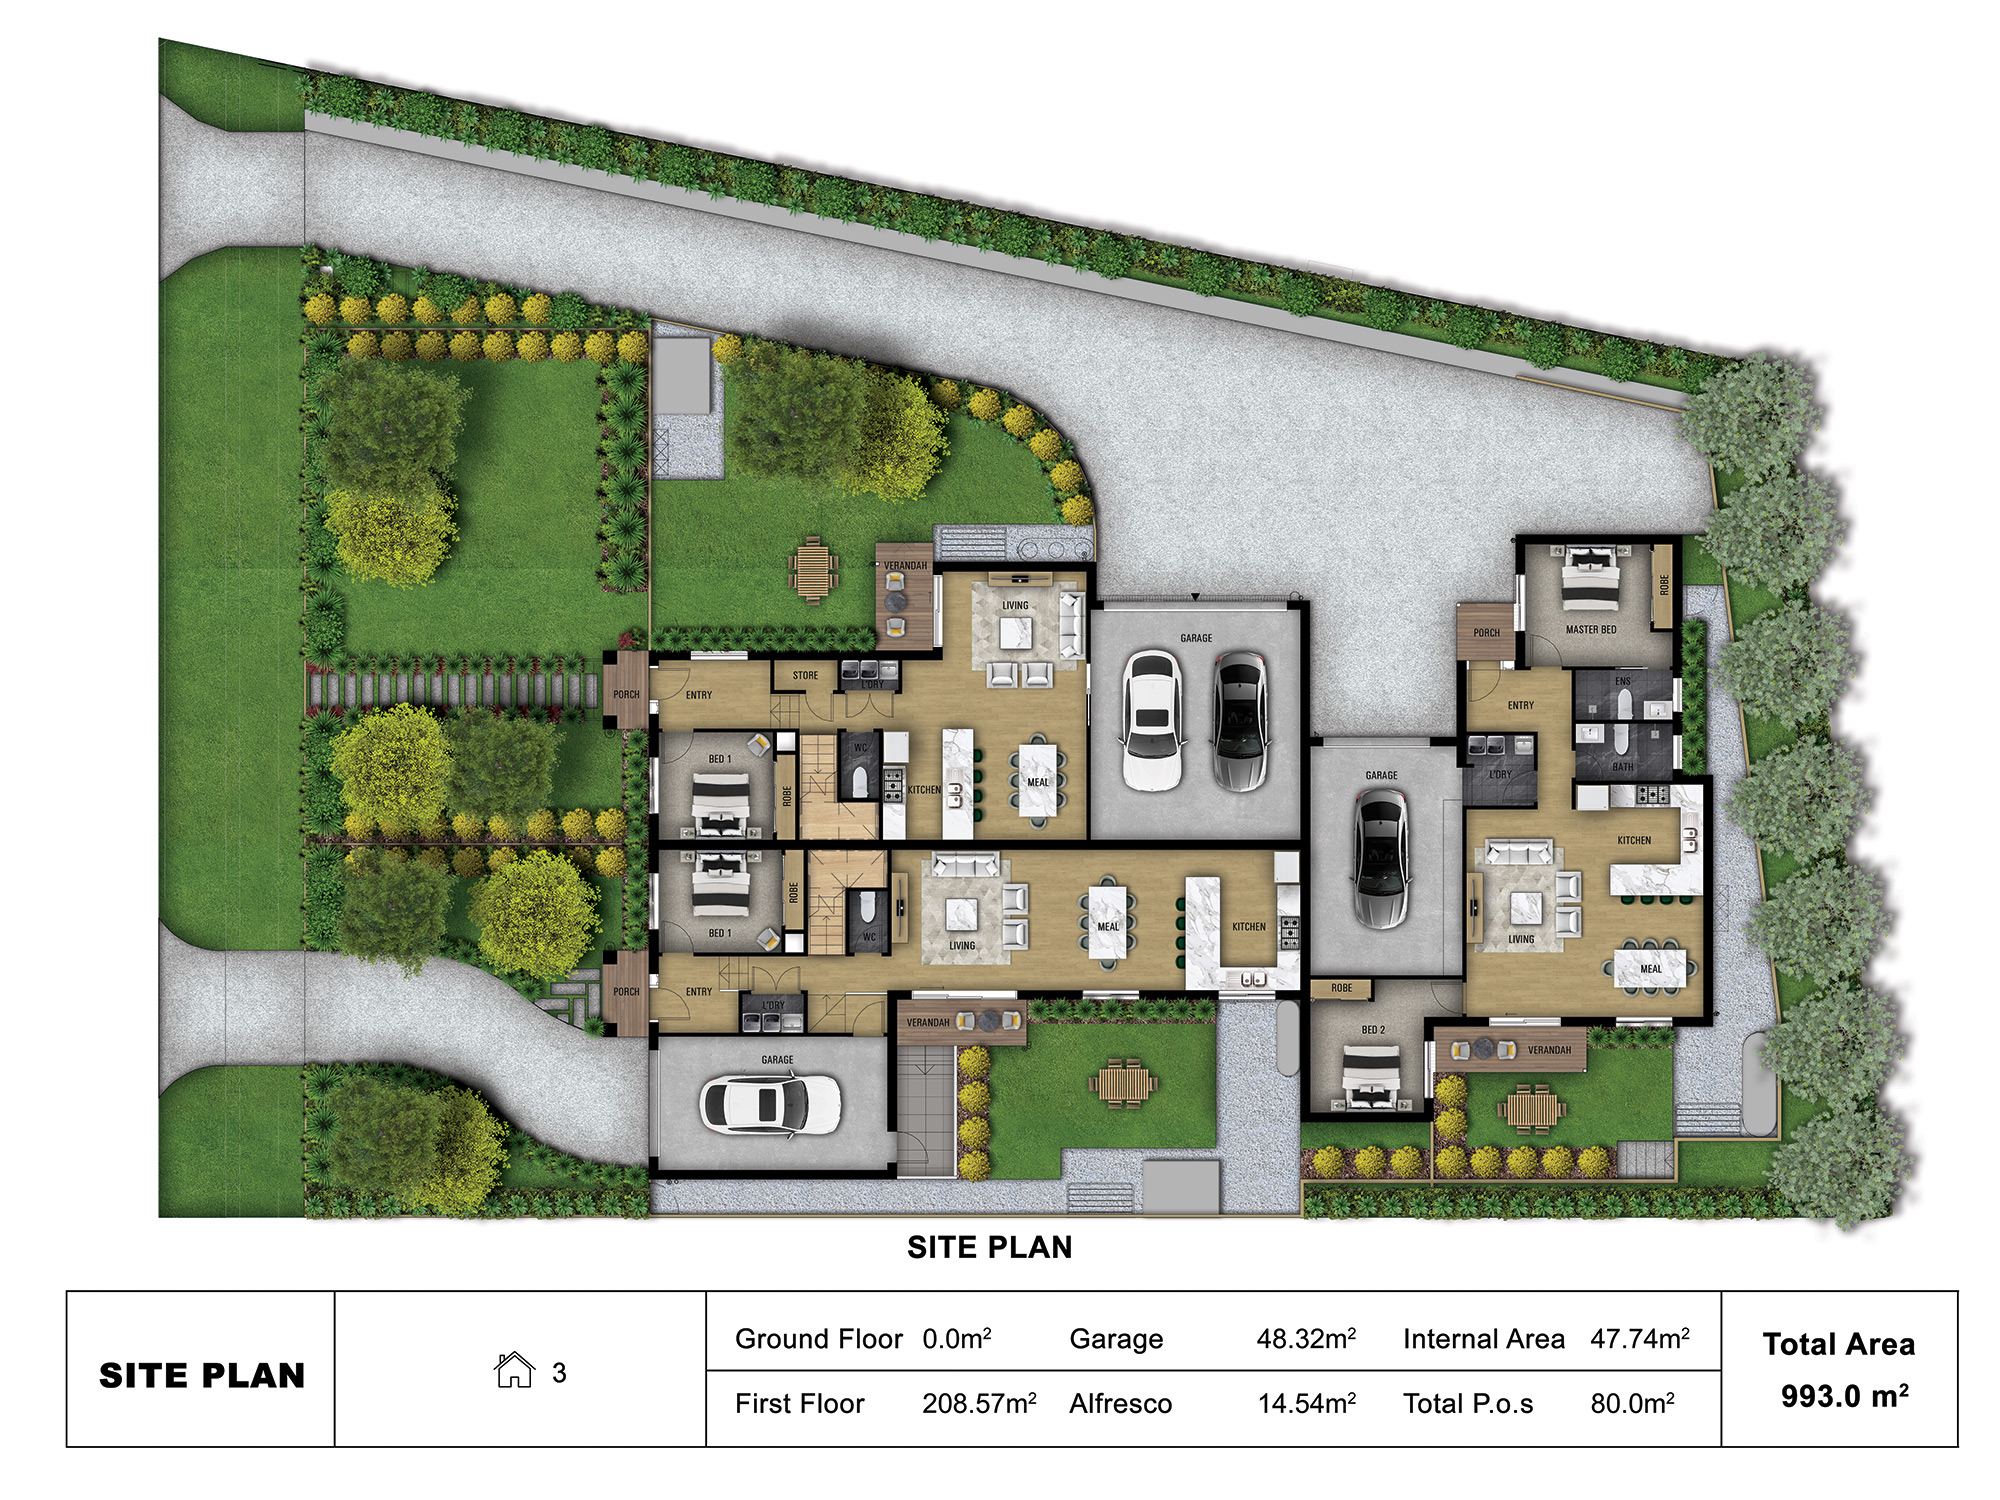 S30647 12 Browning Rd Boronia Floor Plans SITE PLAN